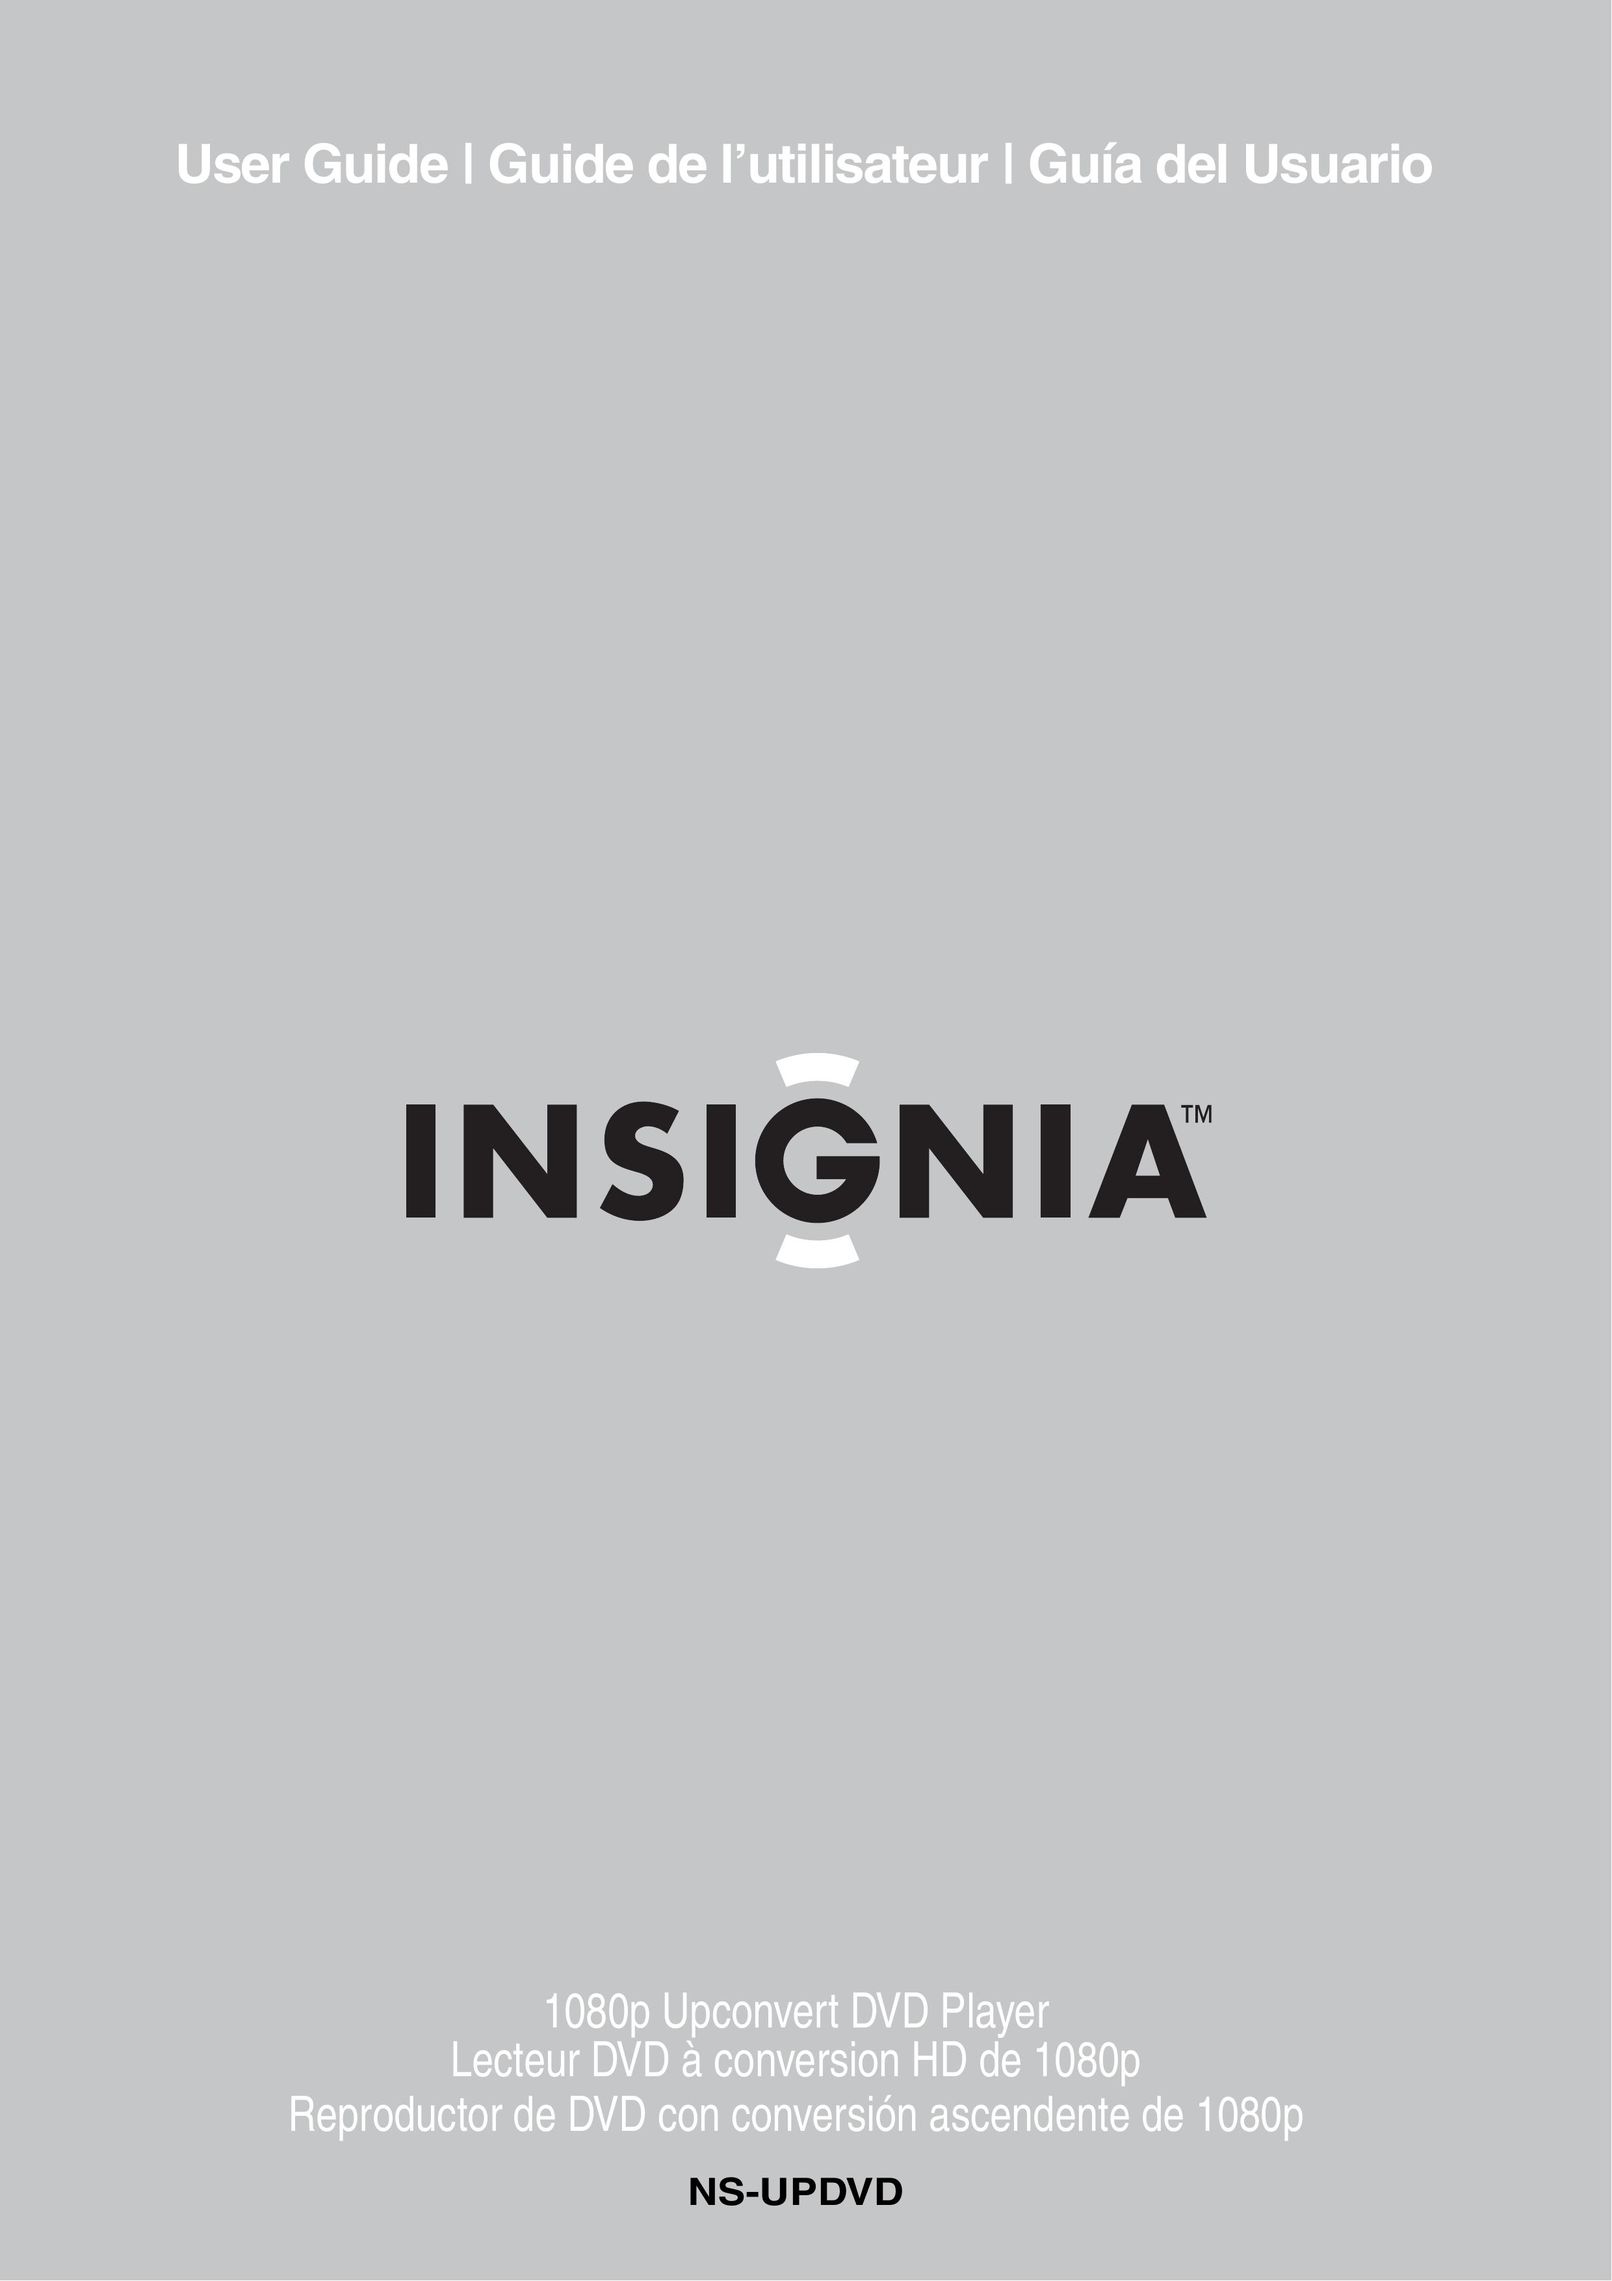 Insignia NS-UPDVD DVD Player User Manual